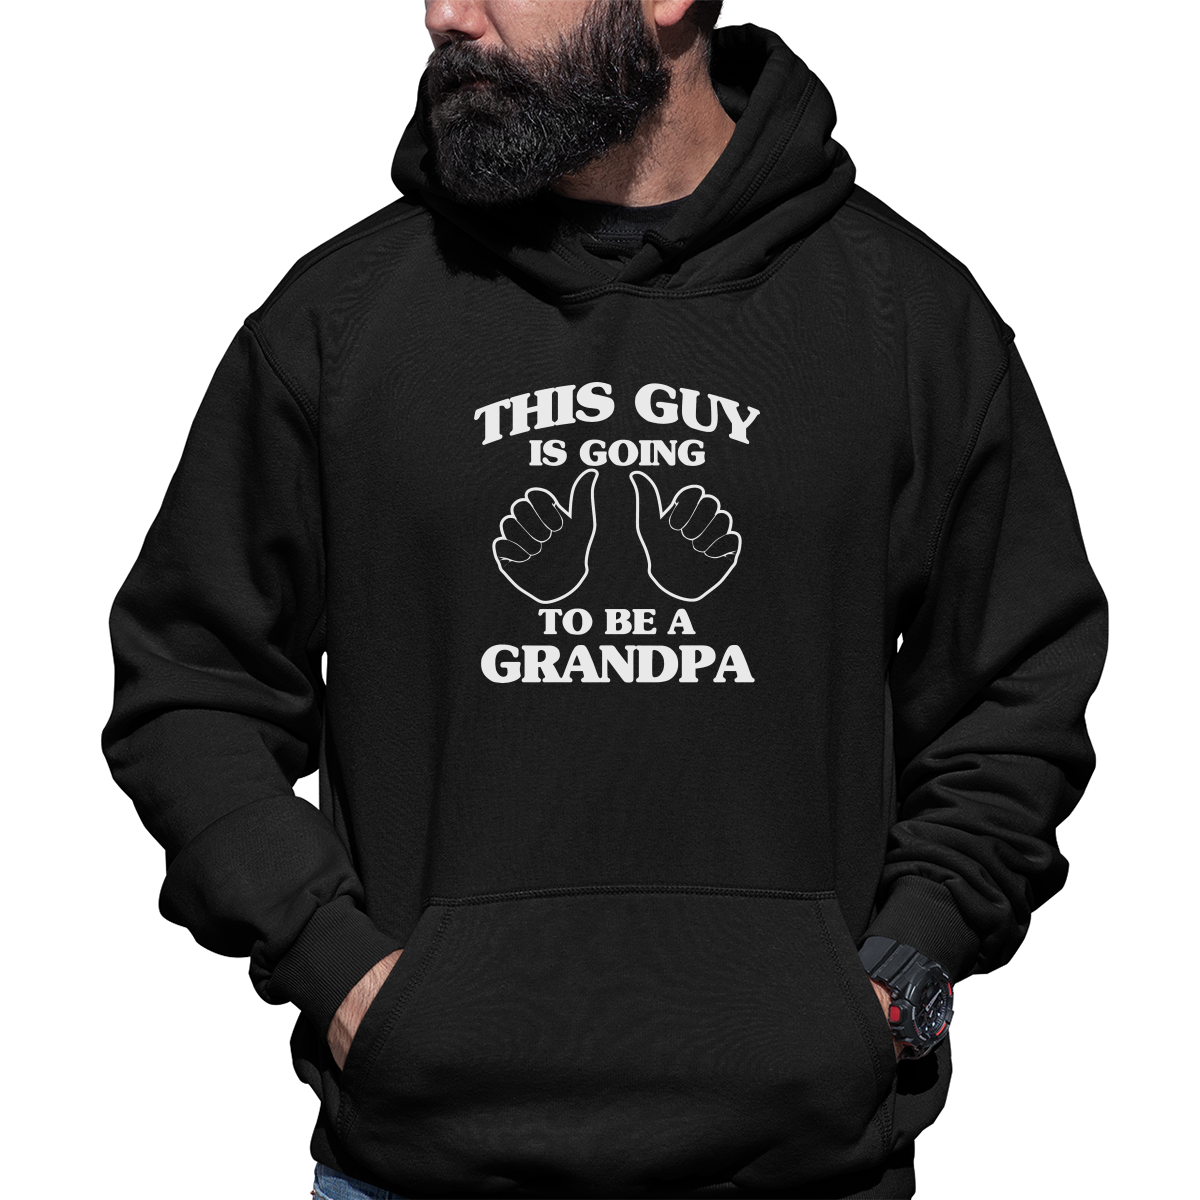 This Guy Is Going To Be A Grandpa Unisex Hoodie | Black